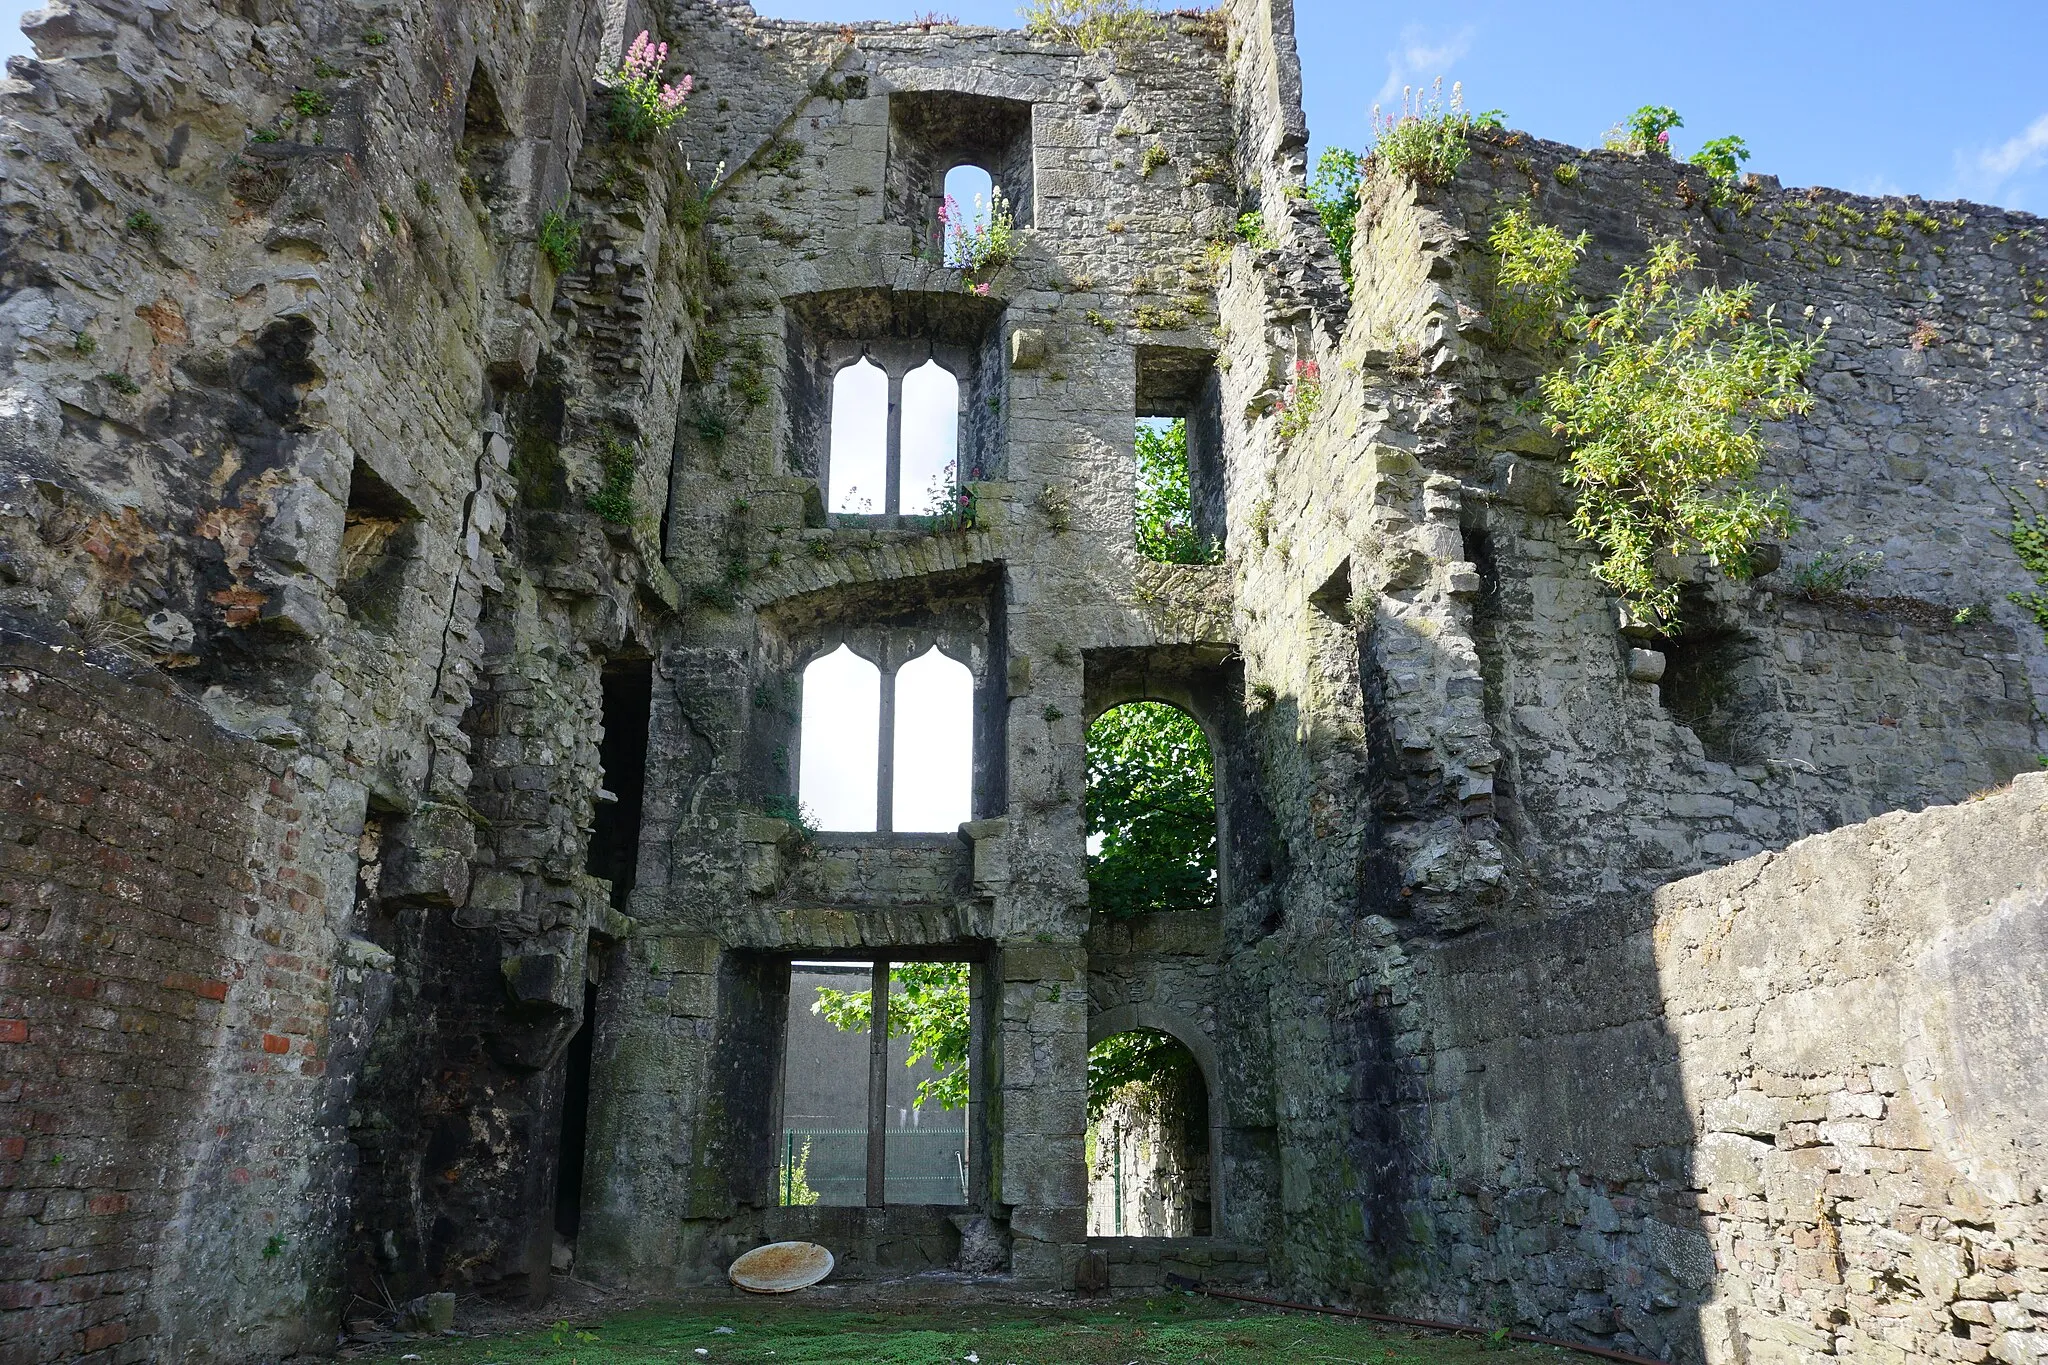 Photo showing: Fanning's Castle, also called Whitamore's Castle, is the remains of a tower house and National Monument located in Limerick, Ireland